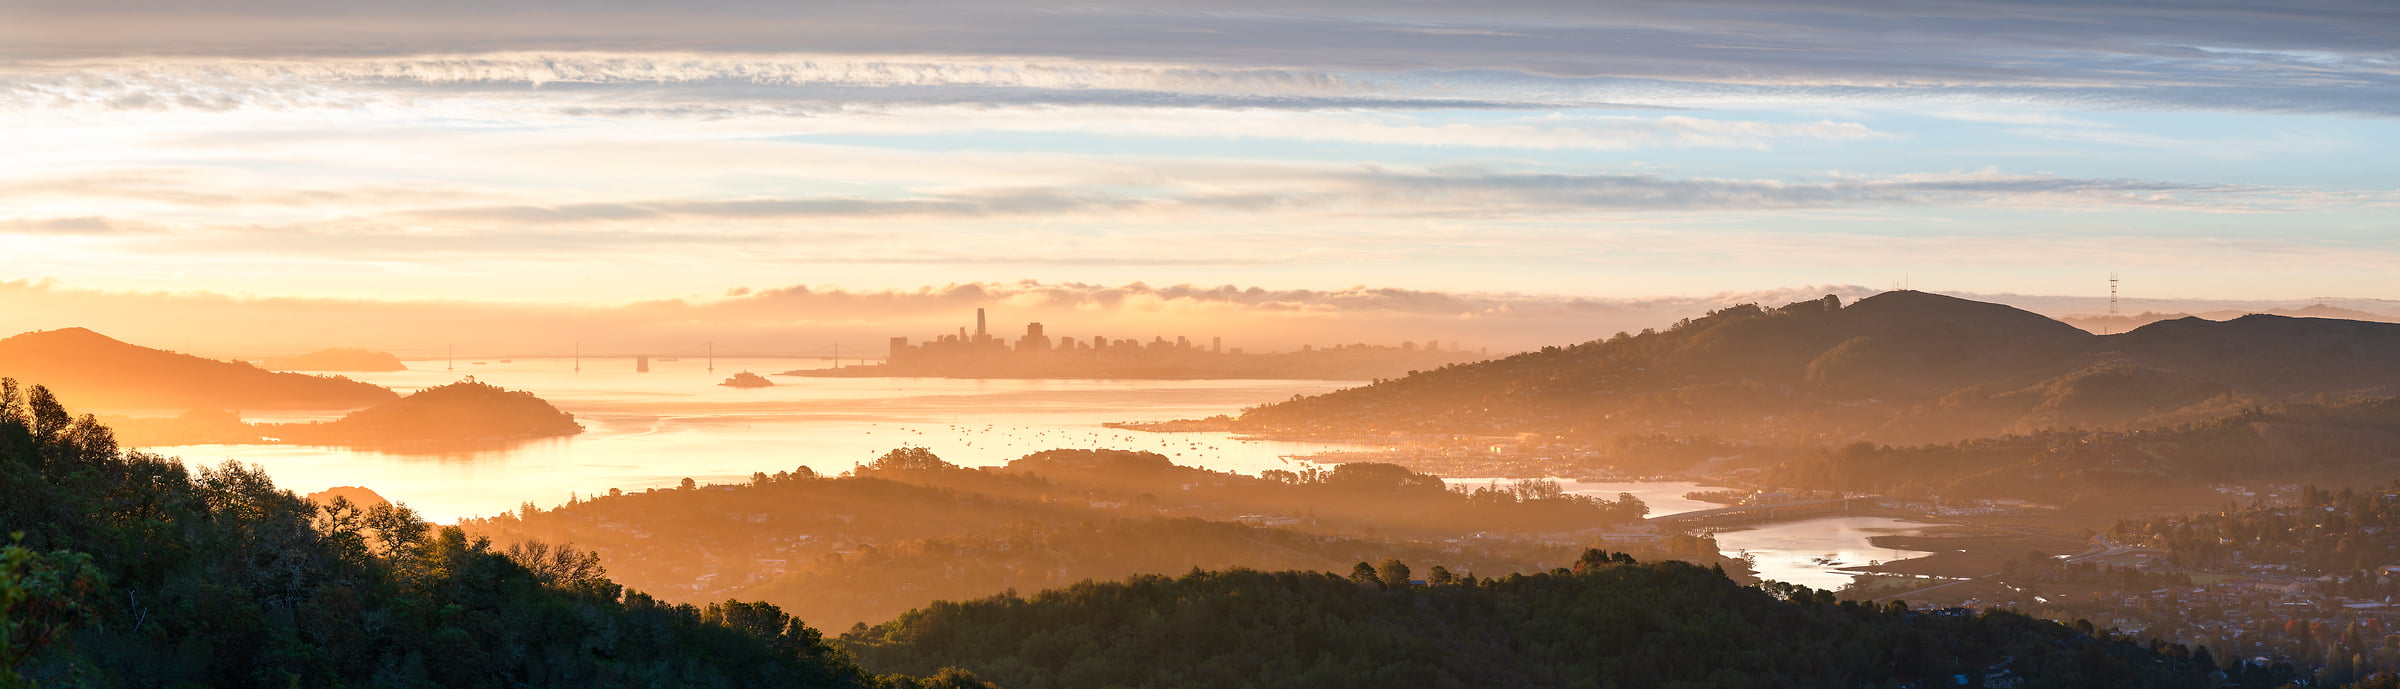 231 megapixels! A very high resolution, large-format VAST photo print of San Francisco at sunrise; landscape photograph created by Jeff Lewis in Marin County, California.